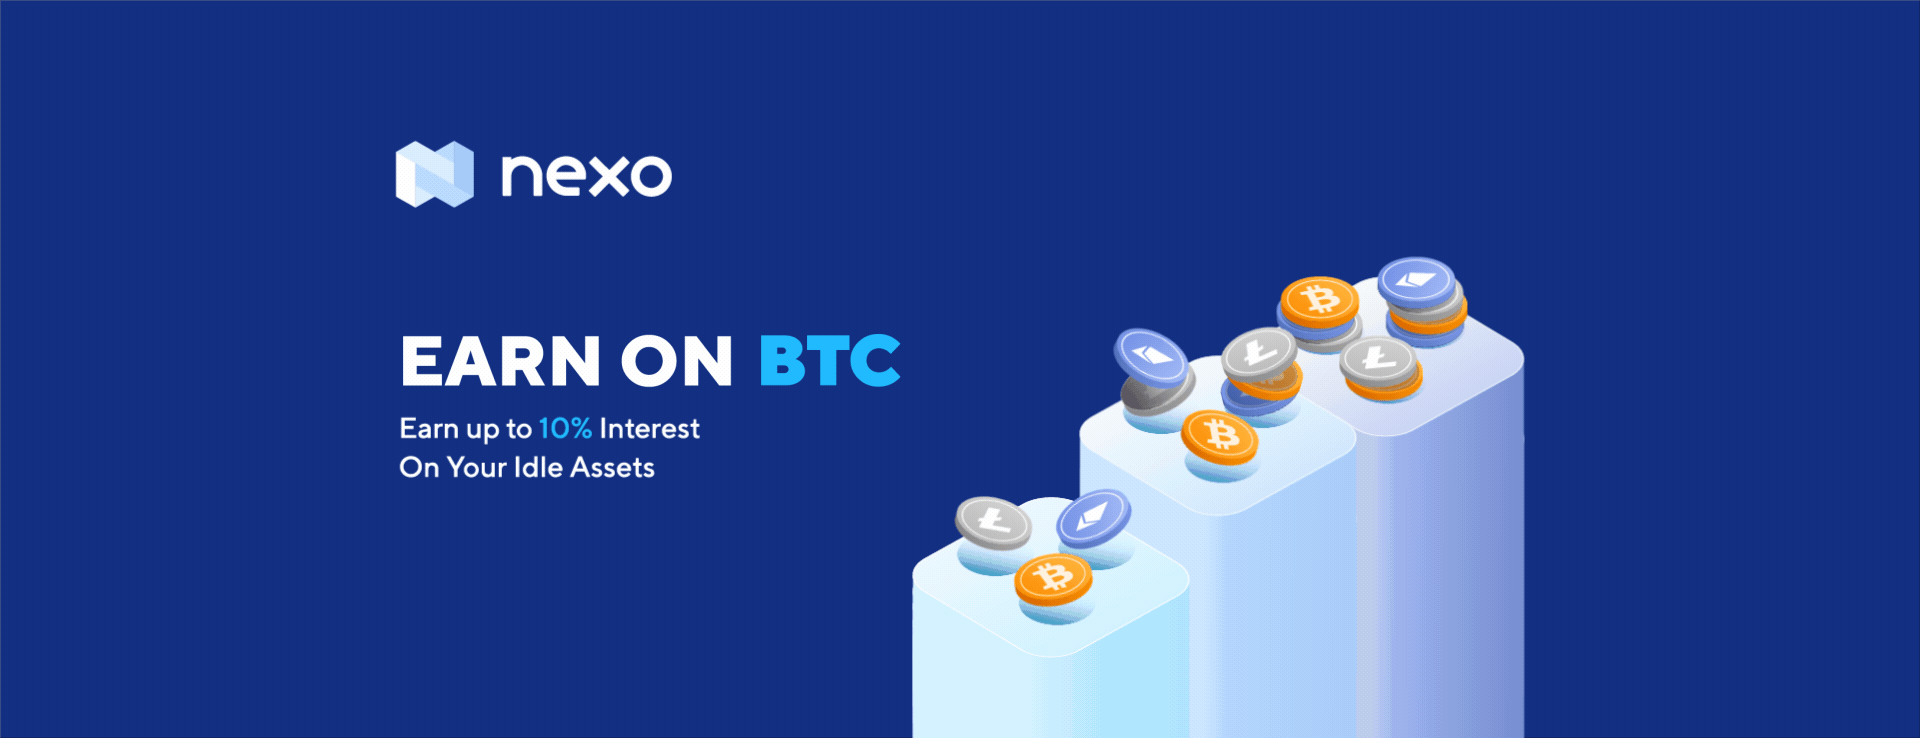 Nexo Sets Crypto-Lending Benchmark – Adds BTC and ETH to Earn On Crypto Suite Offering up to 10% Interest